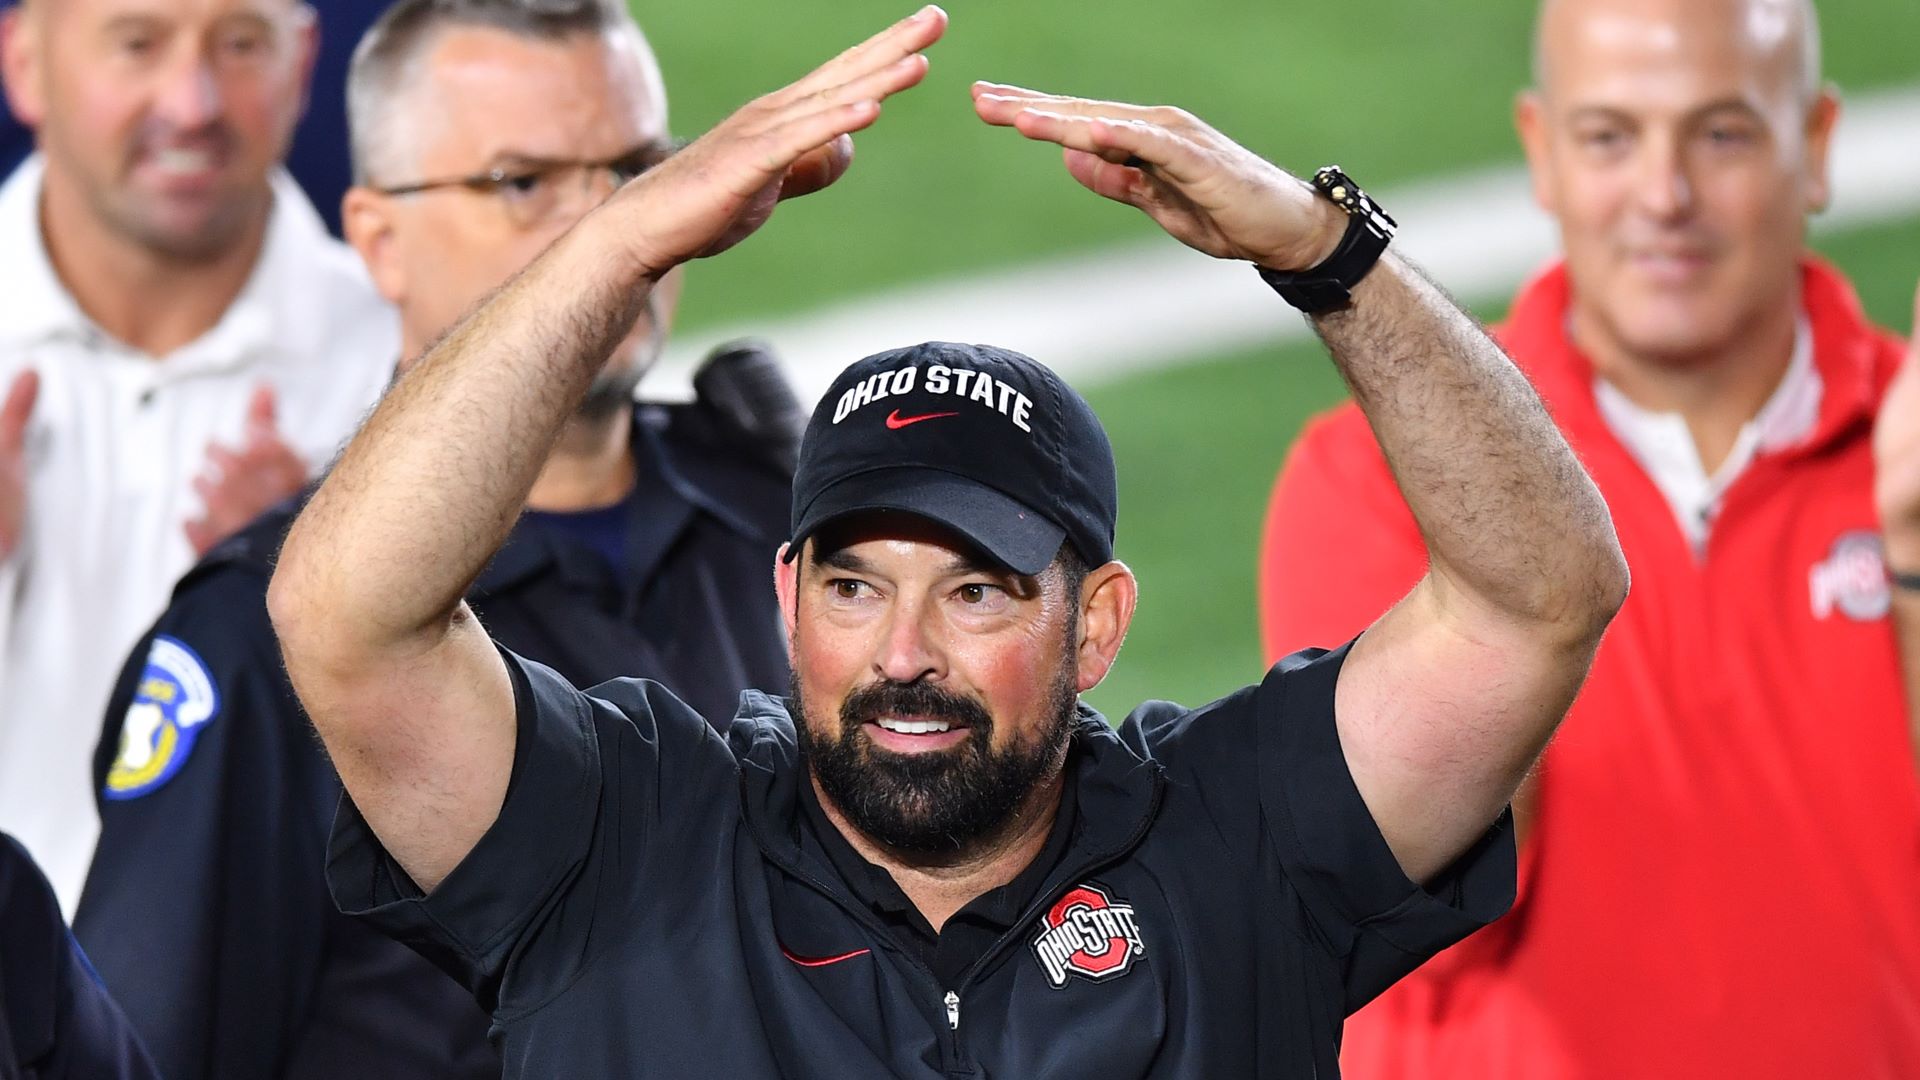 Ohio State’s Ryan Day Barks Back At Lou Holtz After Beating Notre
Dame